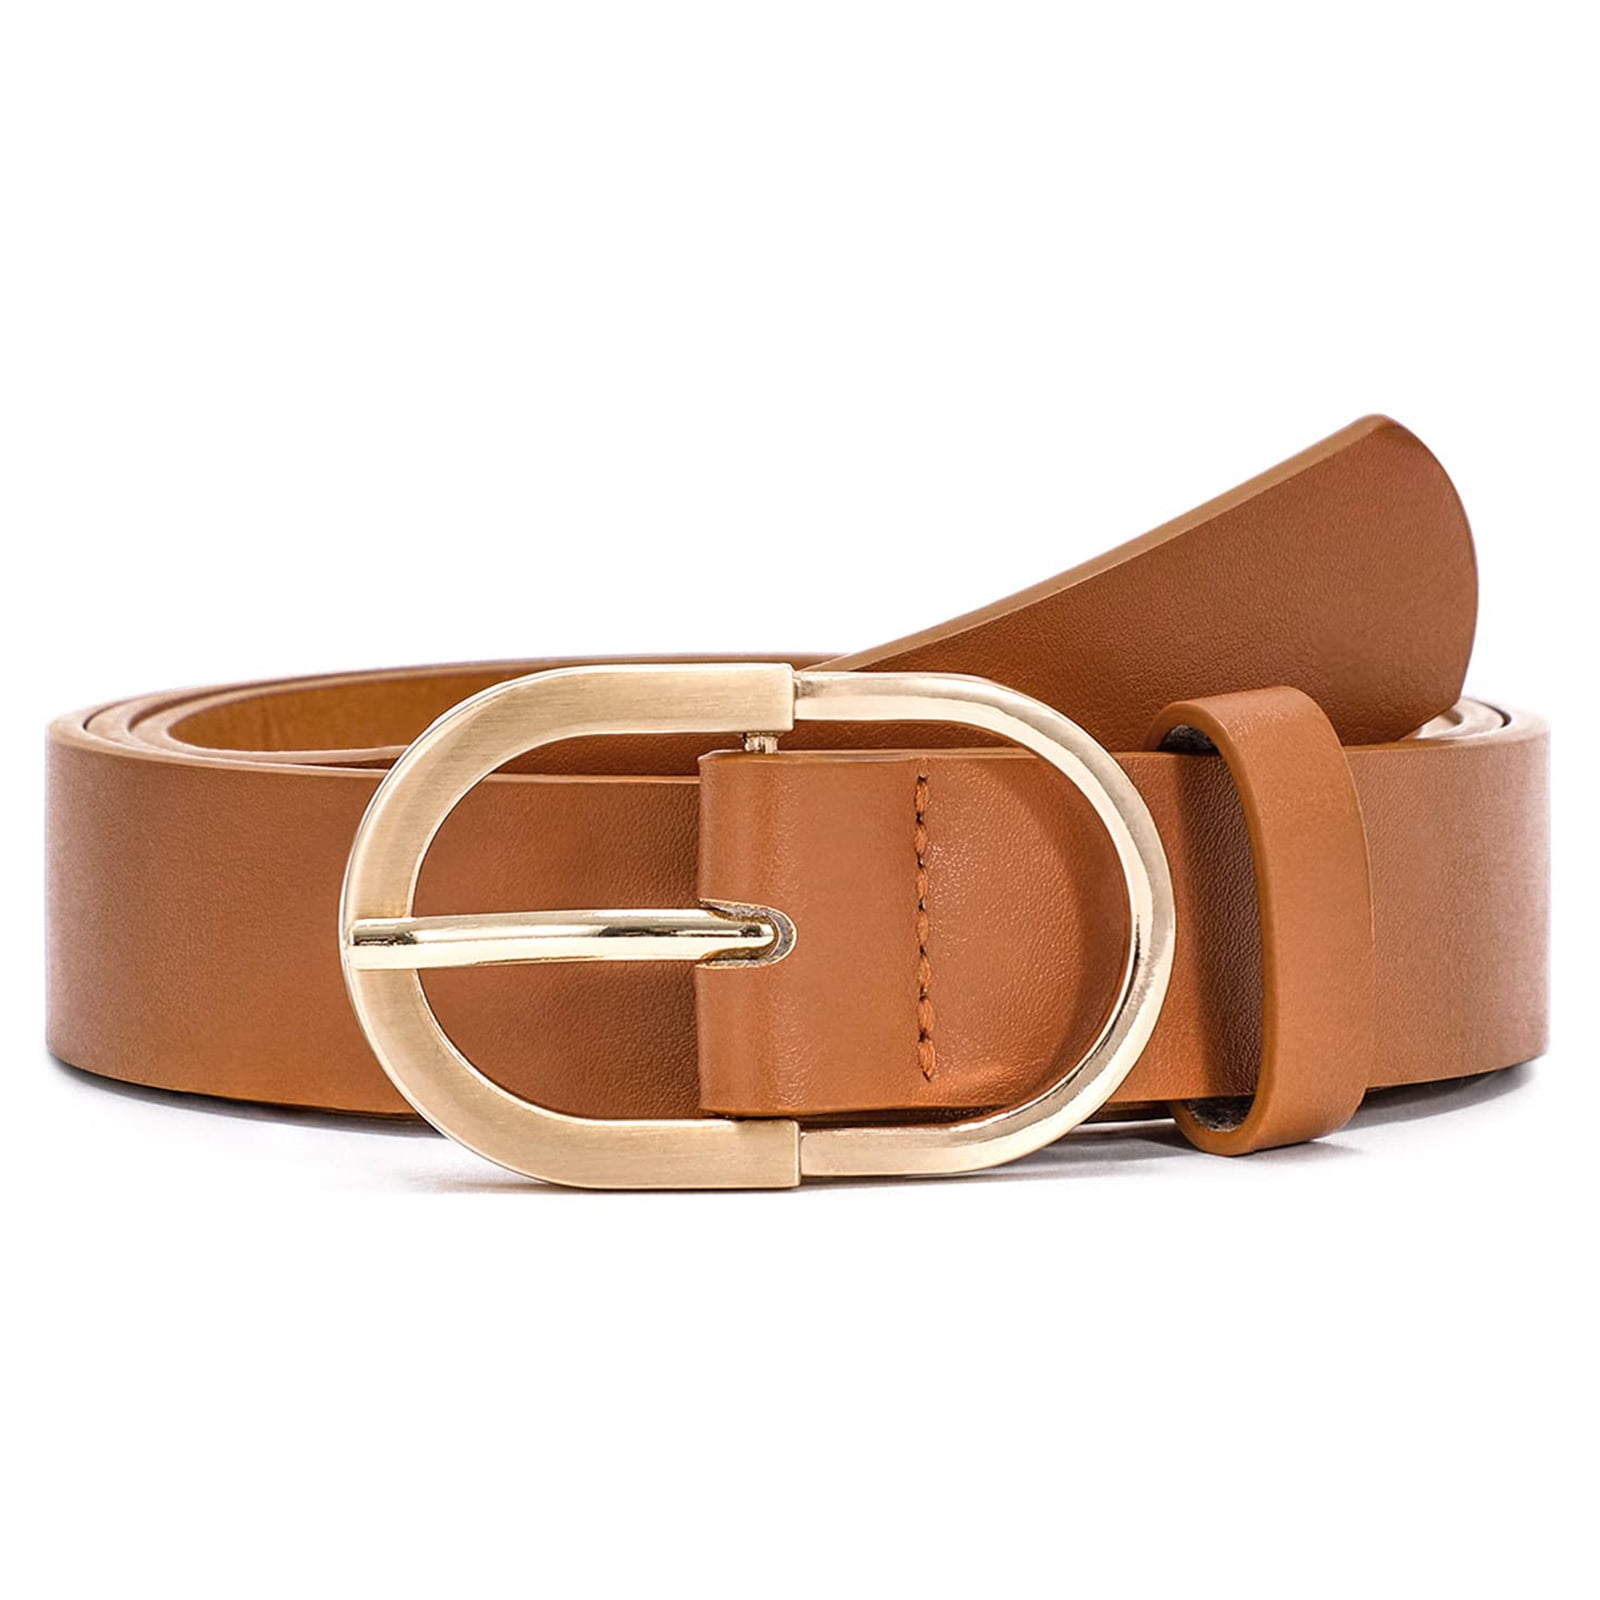 WHIPPY Women's Leather Belts for Jeans Dress Gold Buckle Ladies Waist ...